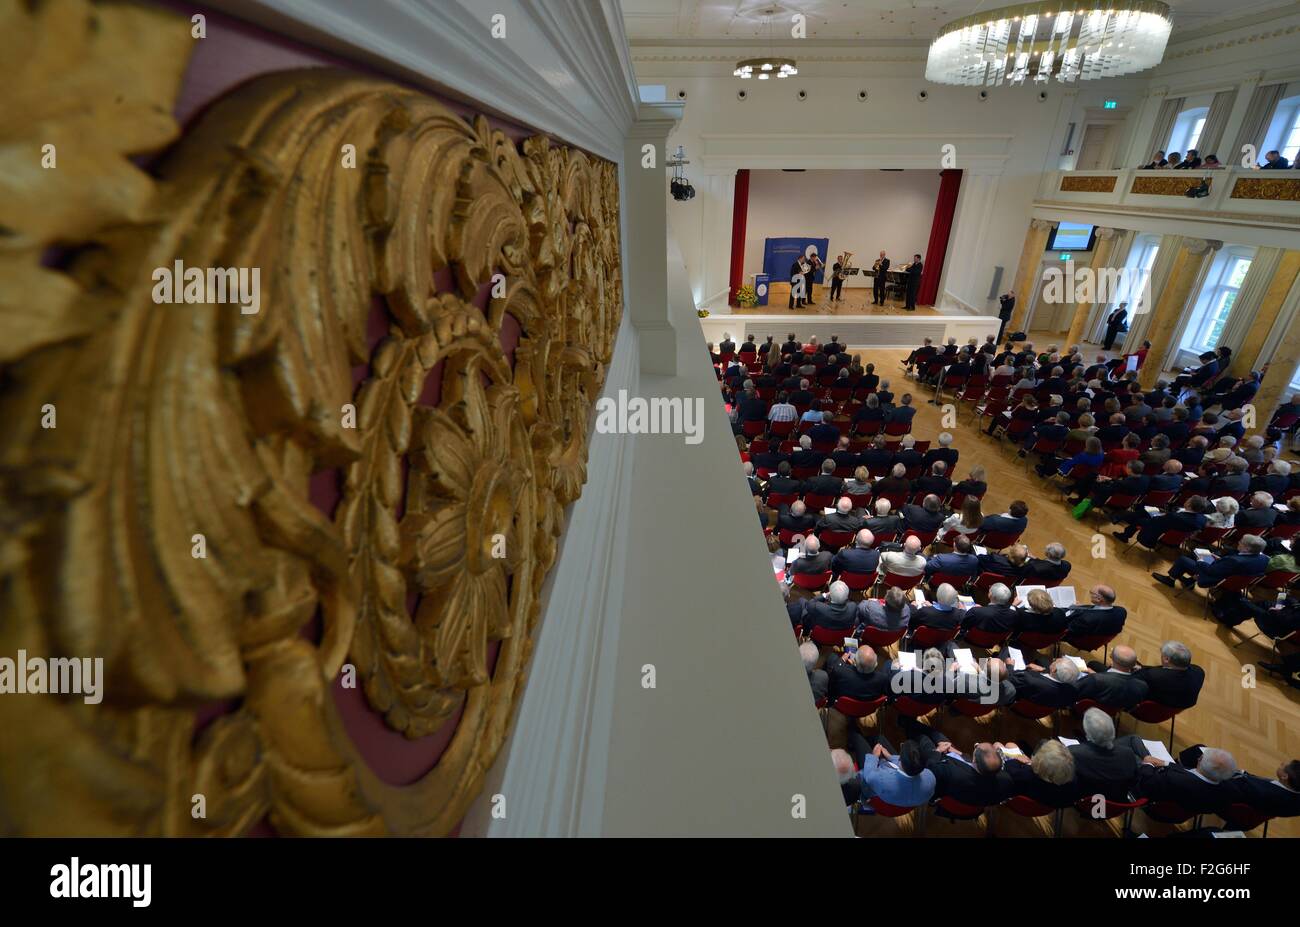 Academy members and scientists attend the Leopoldina German National Academy for Sciences annual meeting in Halle/Saale, Germany, 18 September 2015. The event this year is being held under the title 'Symmetry and asymmetry in science and art' Photo: HENDRIK SCHMIDT/DPA Stock Photo